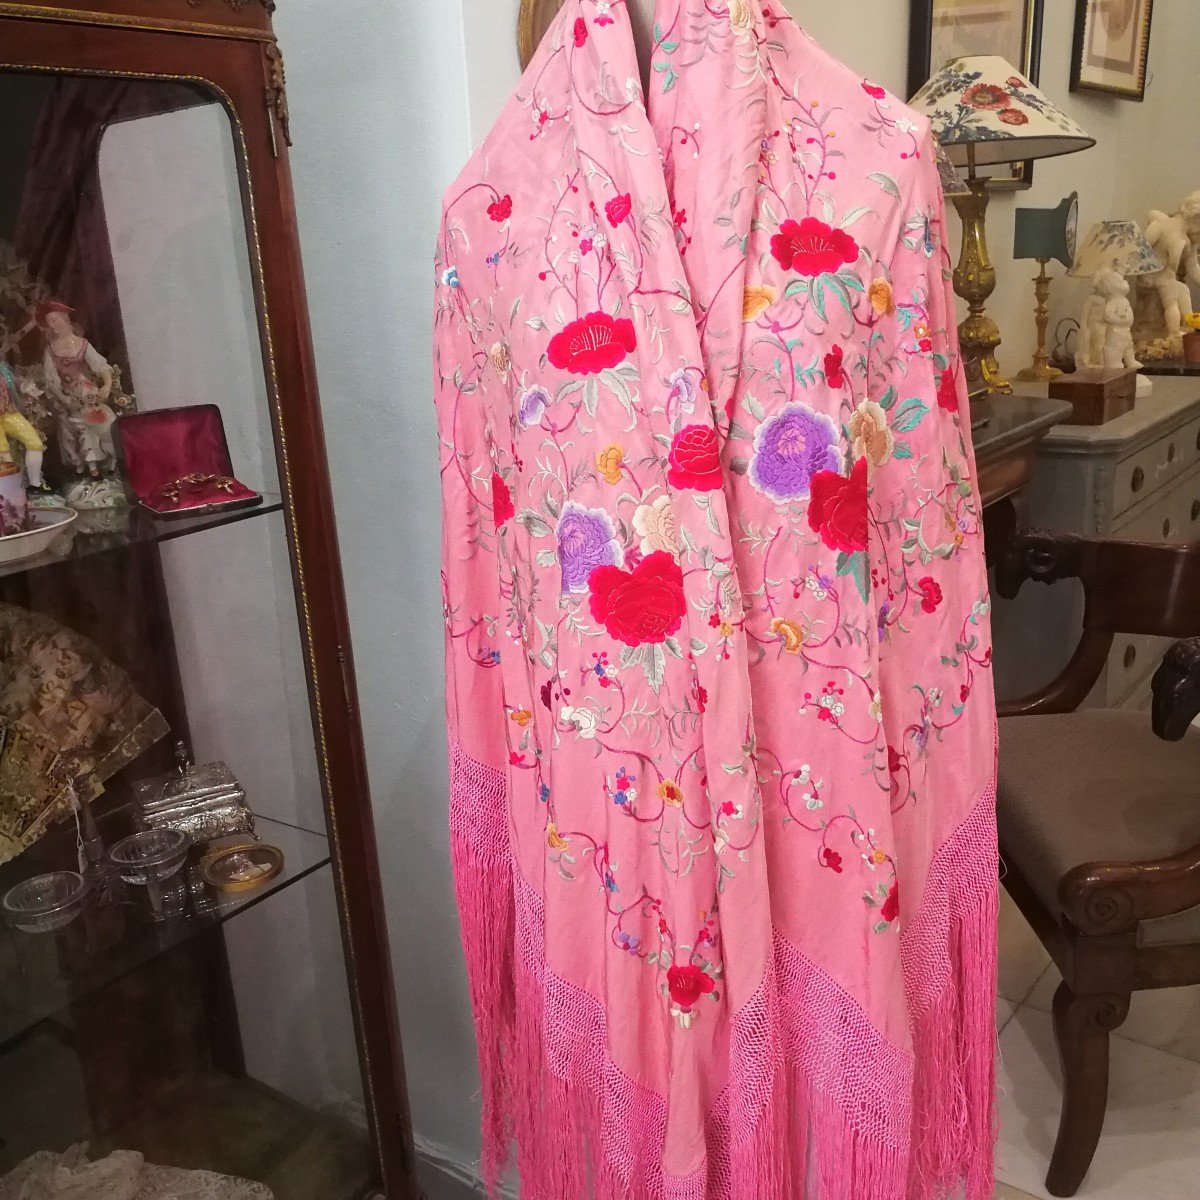 Empire Style Manila Shawl In Strawberry Pink Silk With Flowers, Early 20th Century.-photo-3